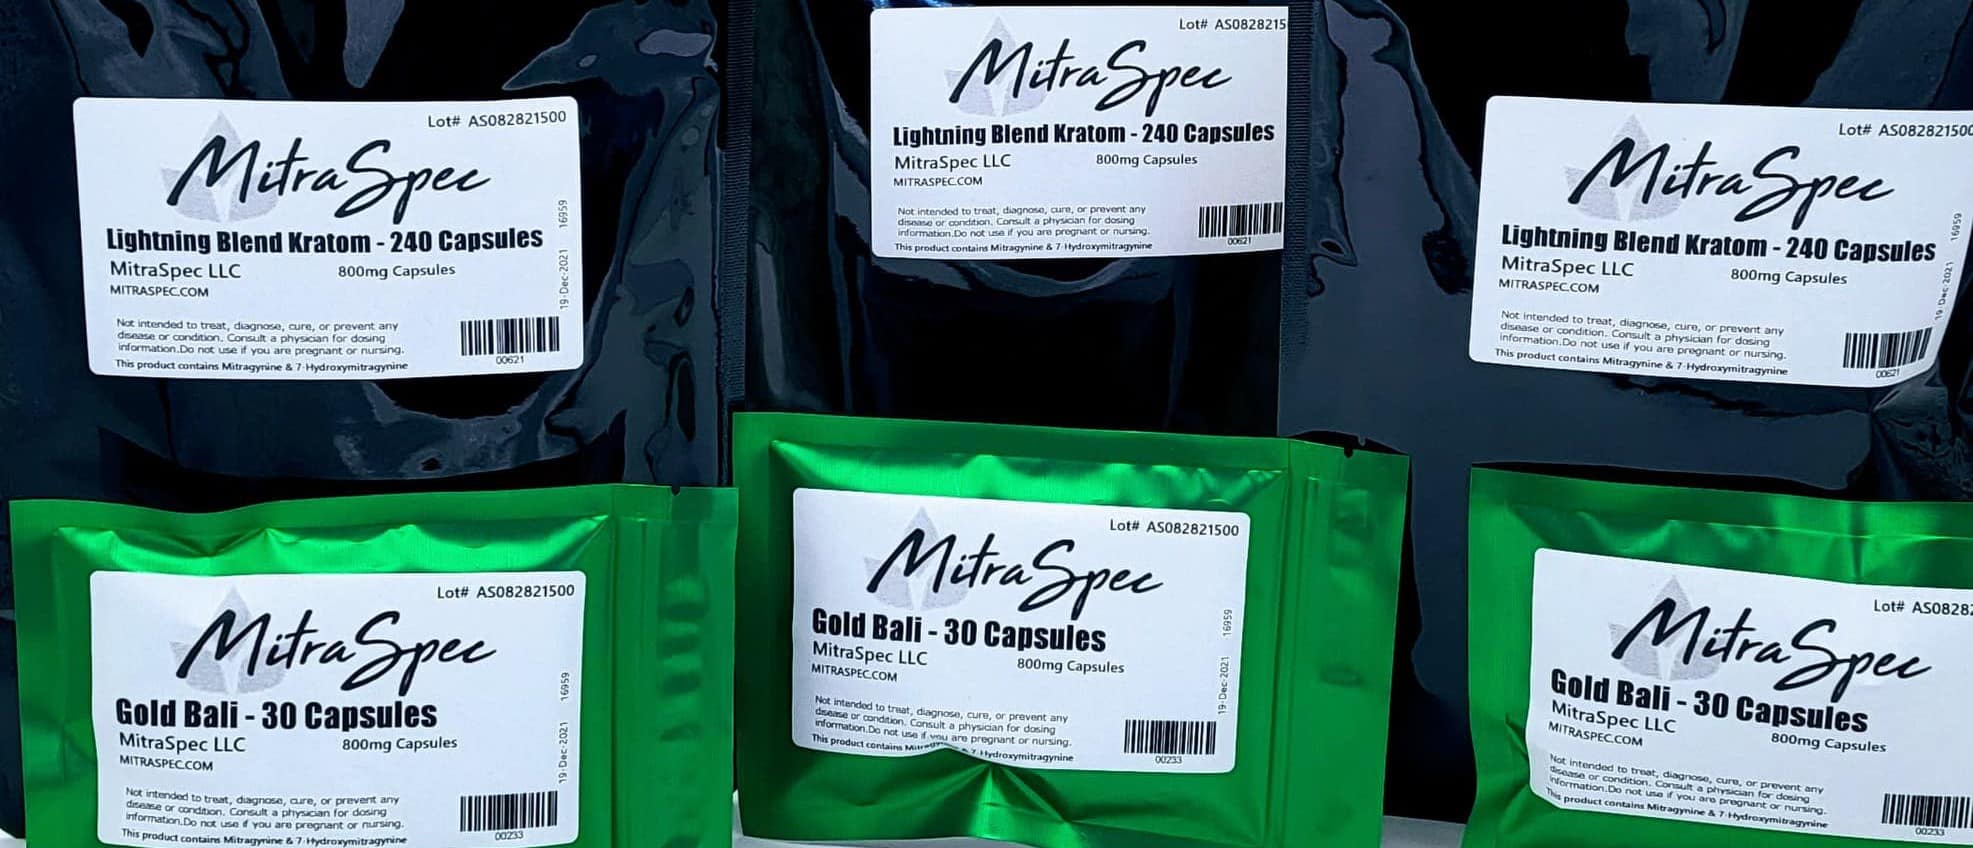 image of mitraspec products